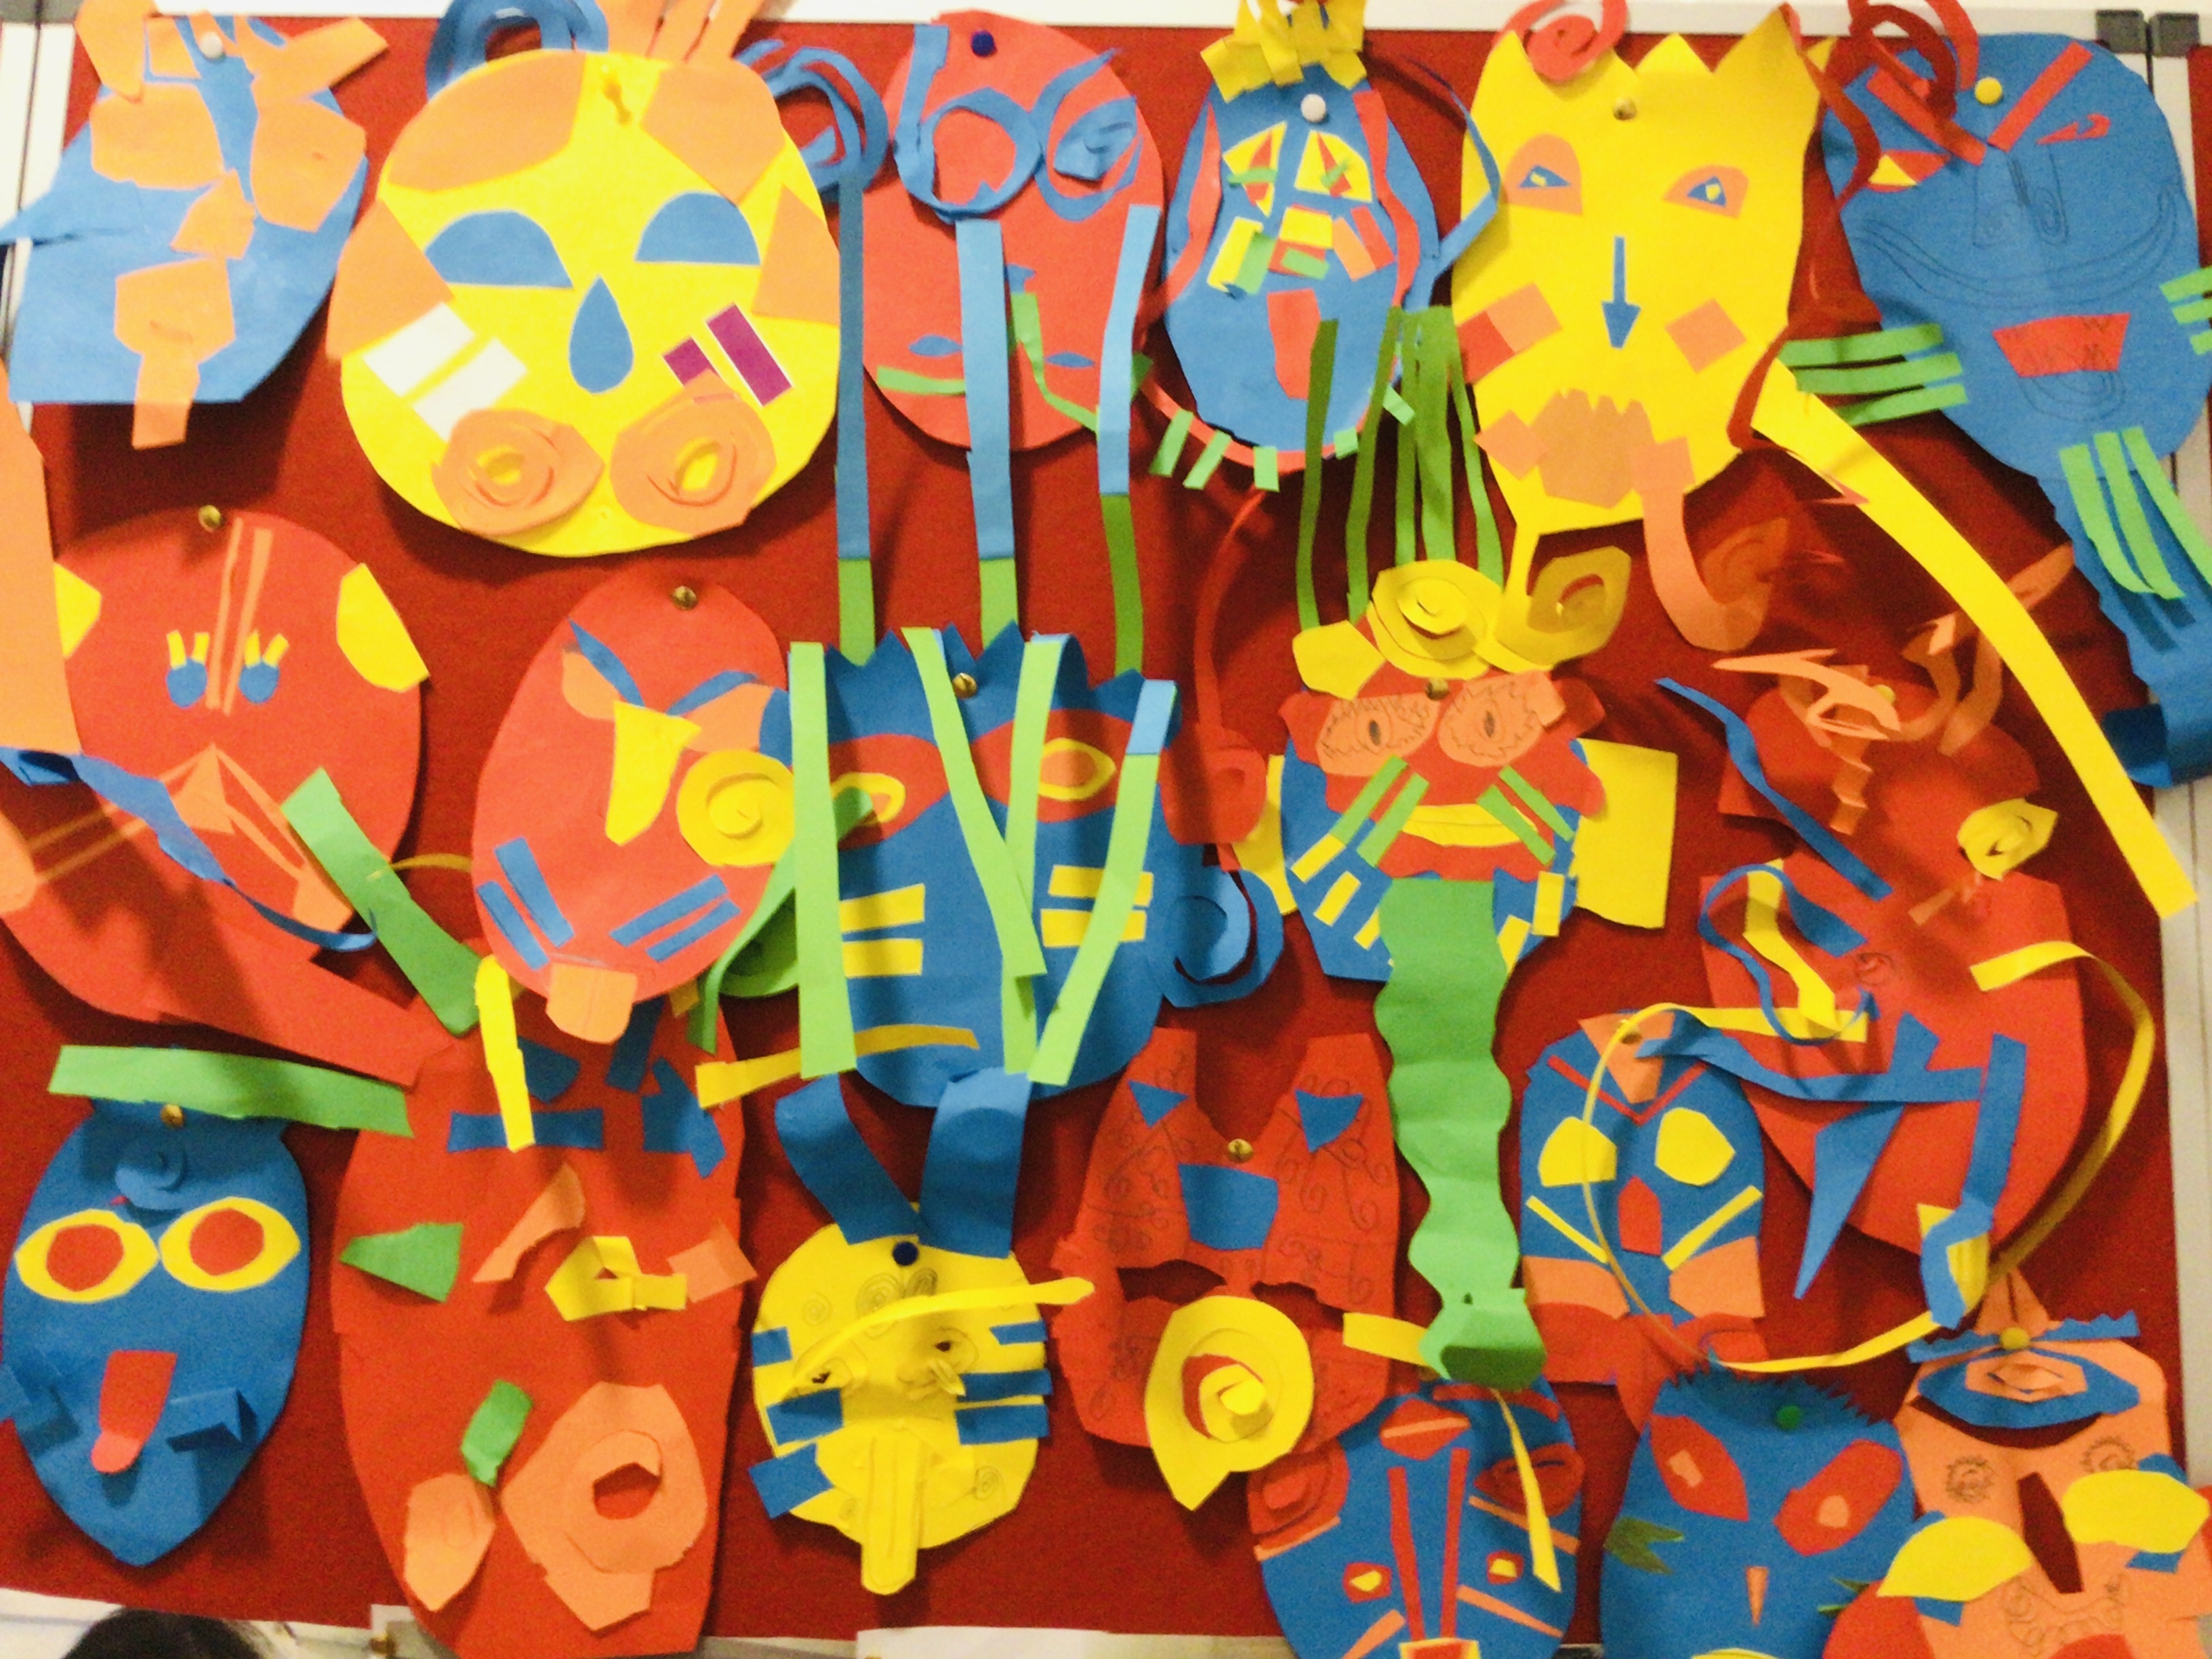 'Paper Masks' by 2nd class St. Catherine's National School () from Dublin